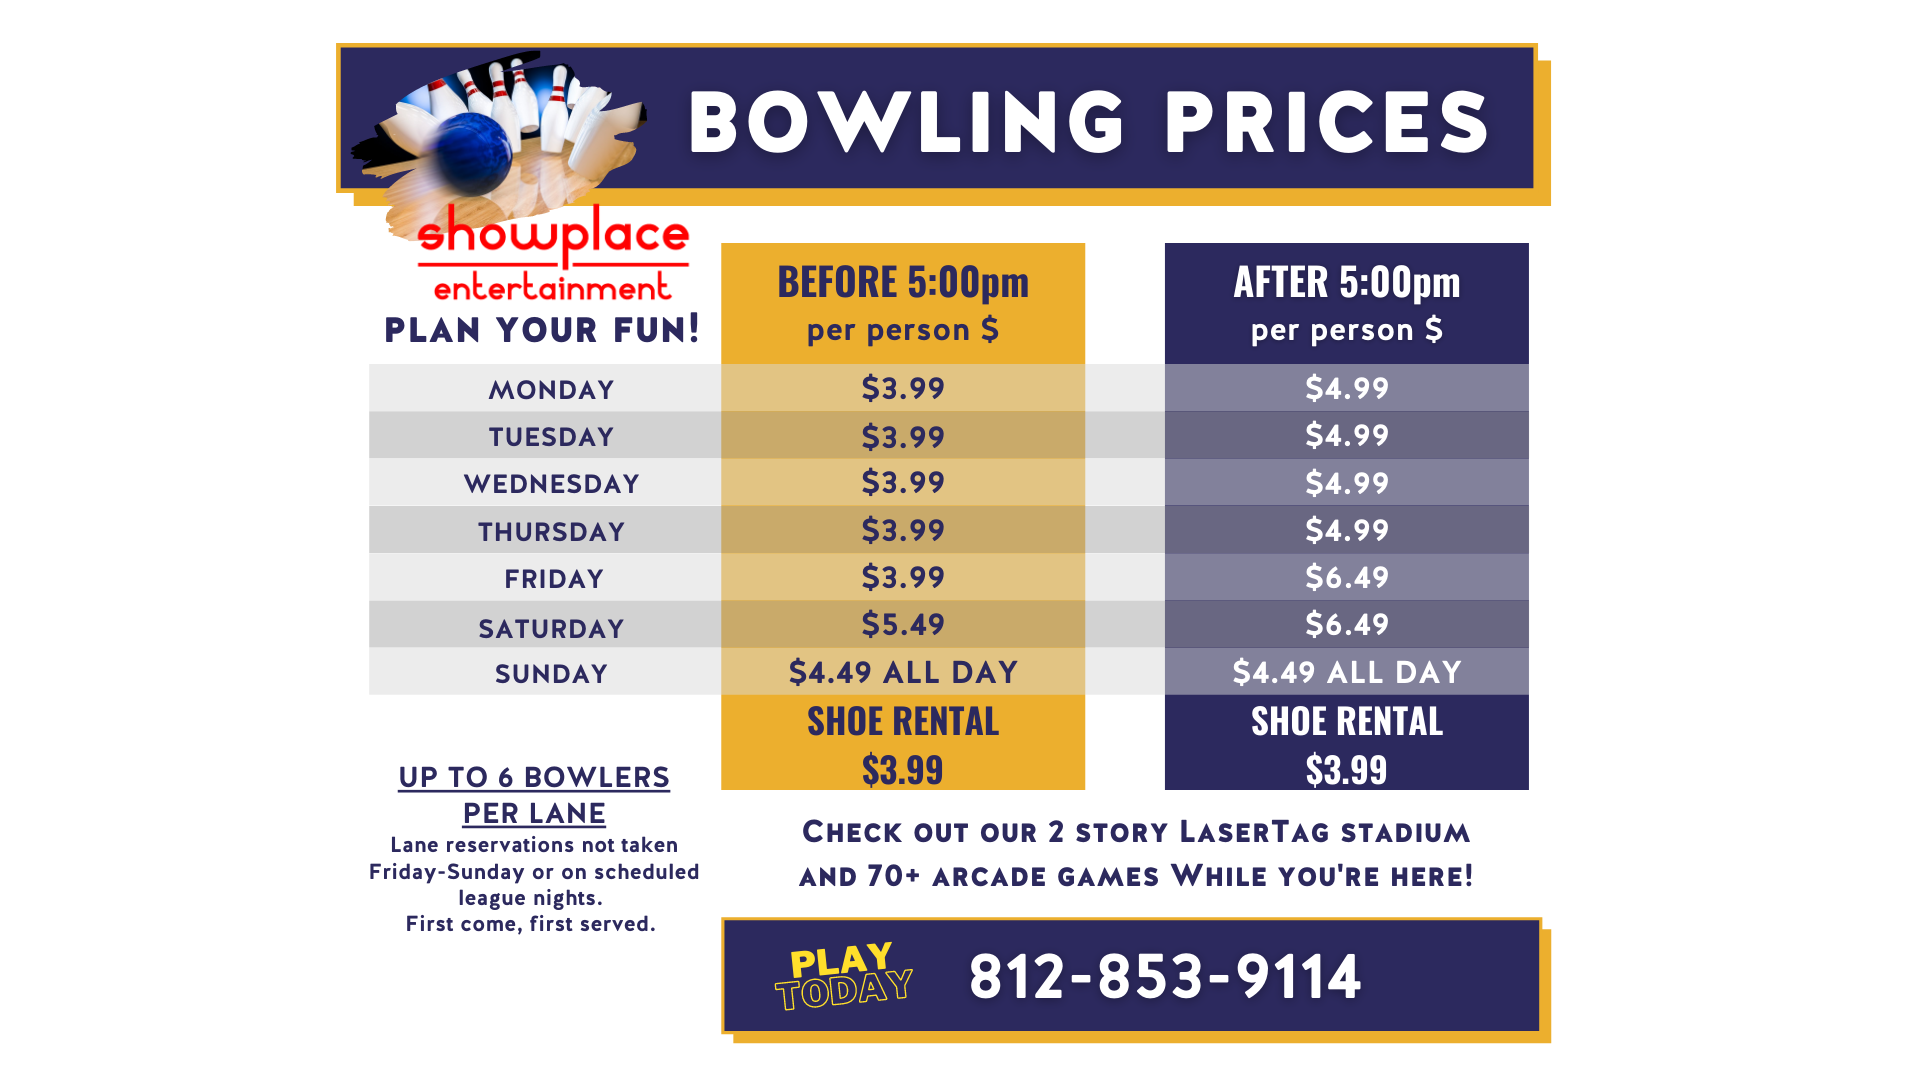 List of bowling prices per time and day